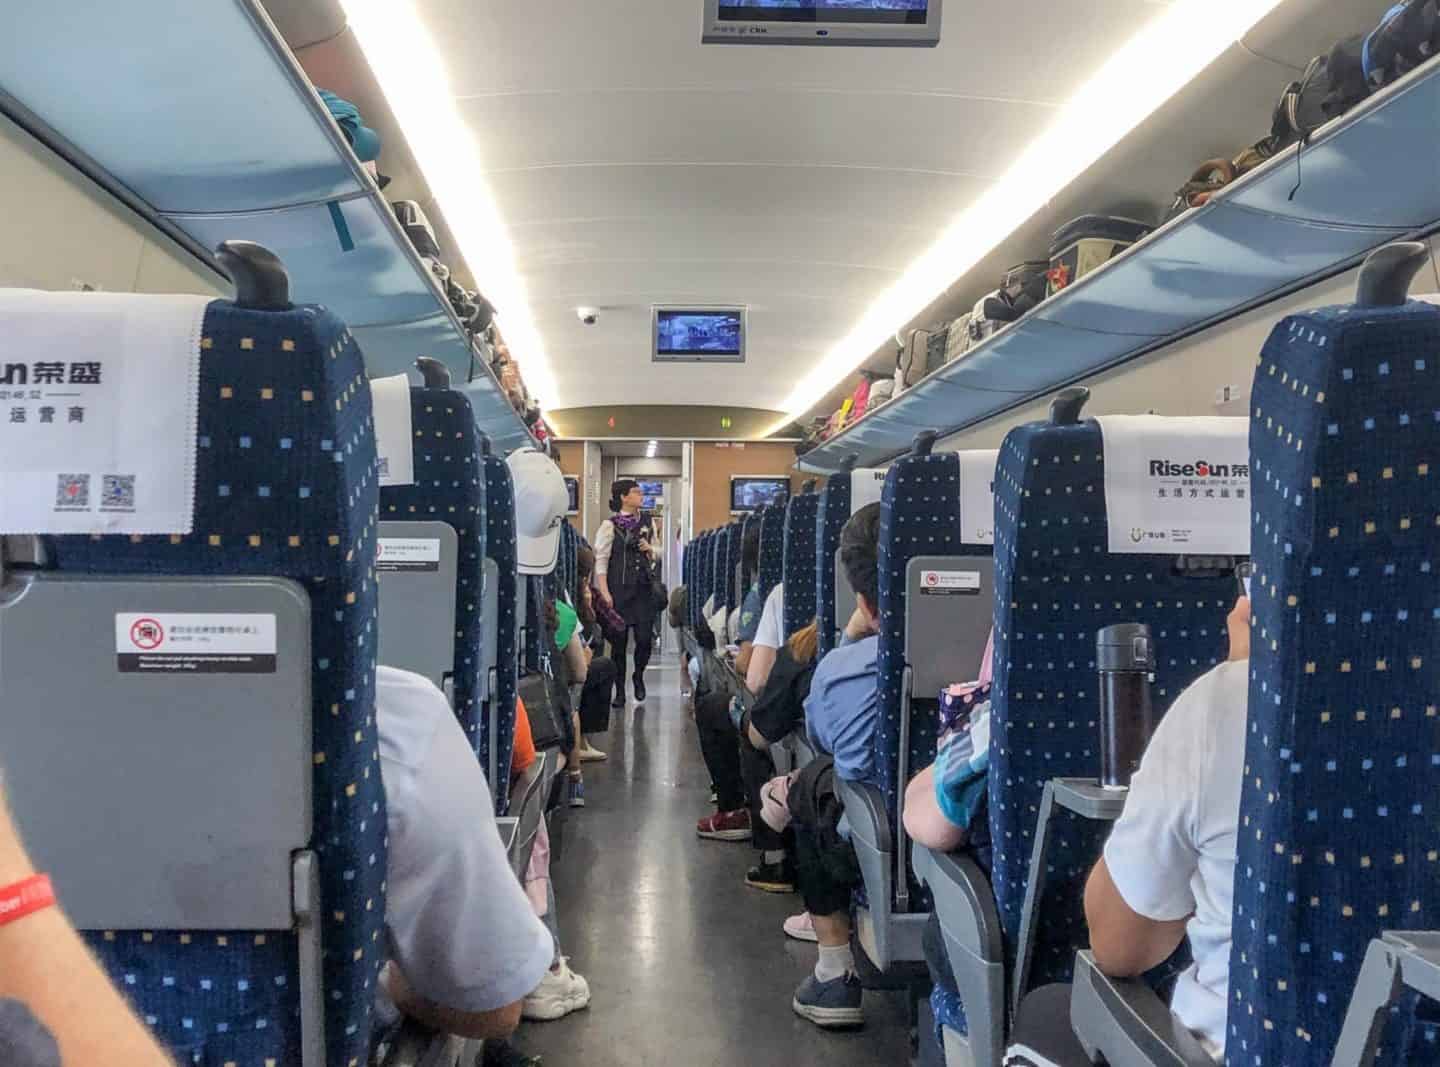 train travel in china, inside of a bullet train in china